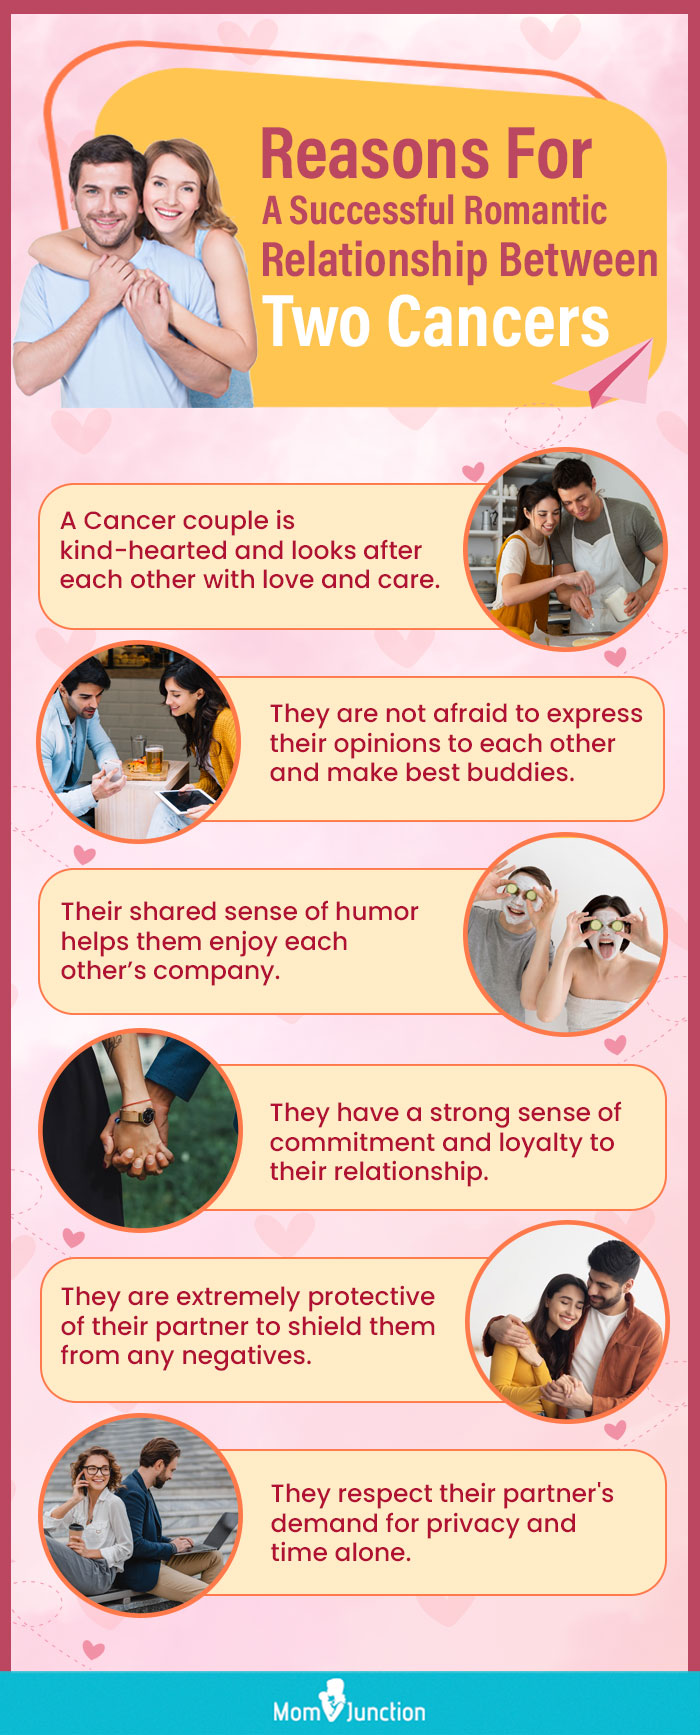  reasons for a successful romantic relationship between two cancers (infographic)